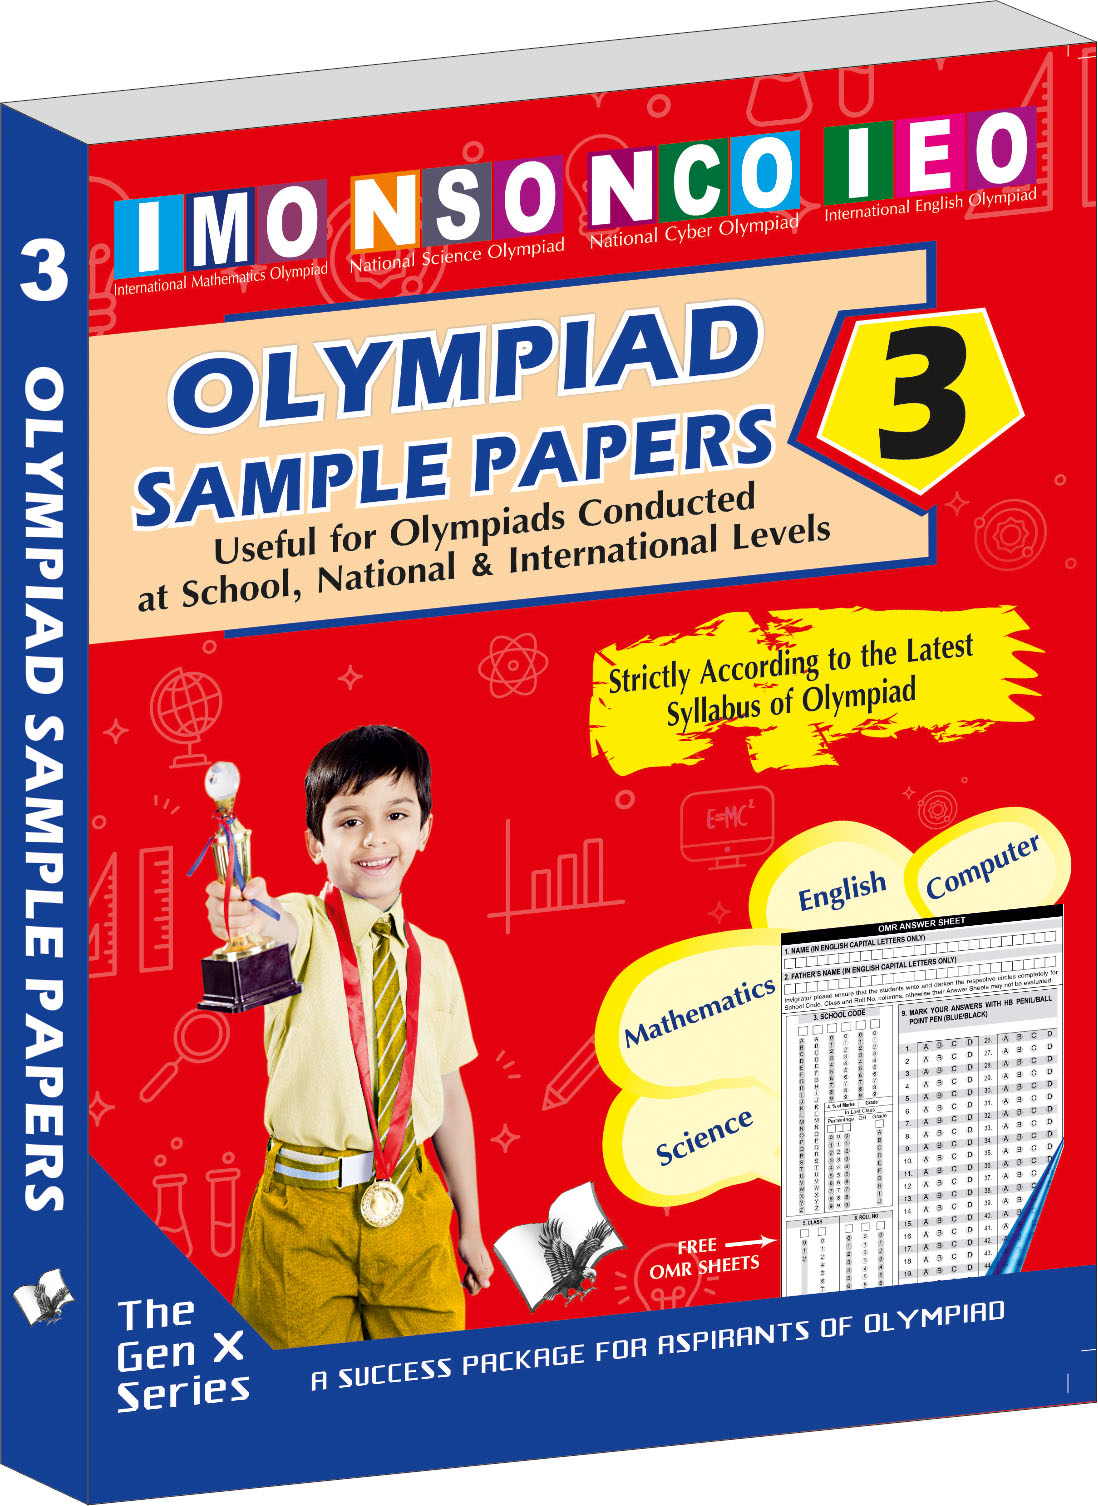 Olympiad Sample Paper 3-Useful for Olympiad conducted at School, National & International levels